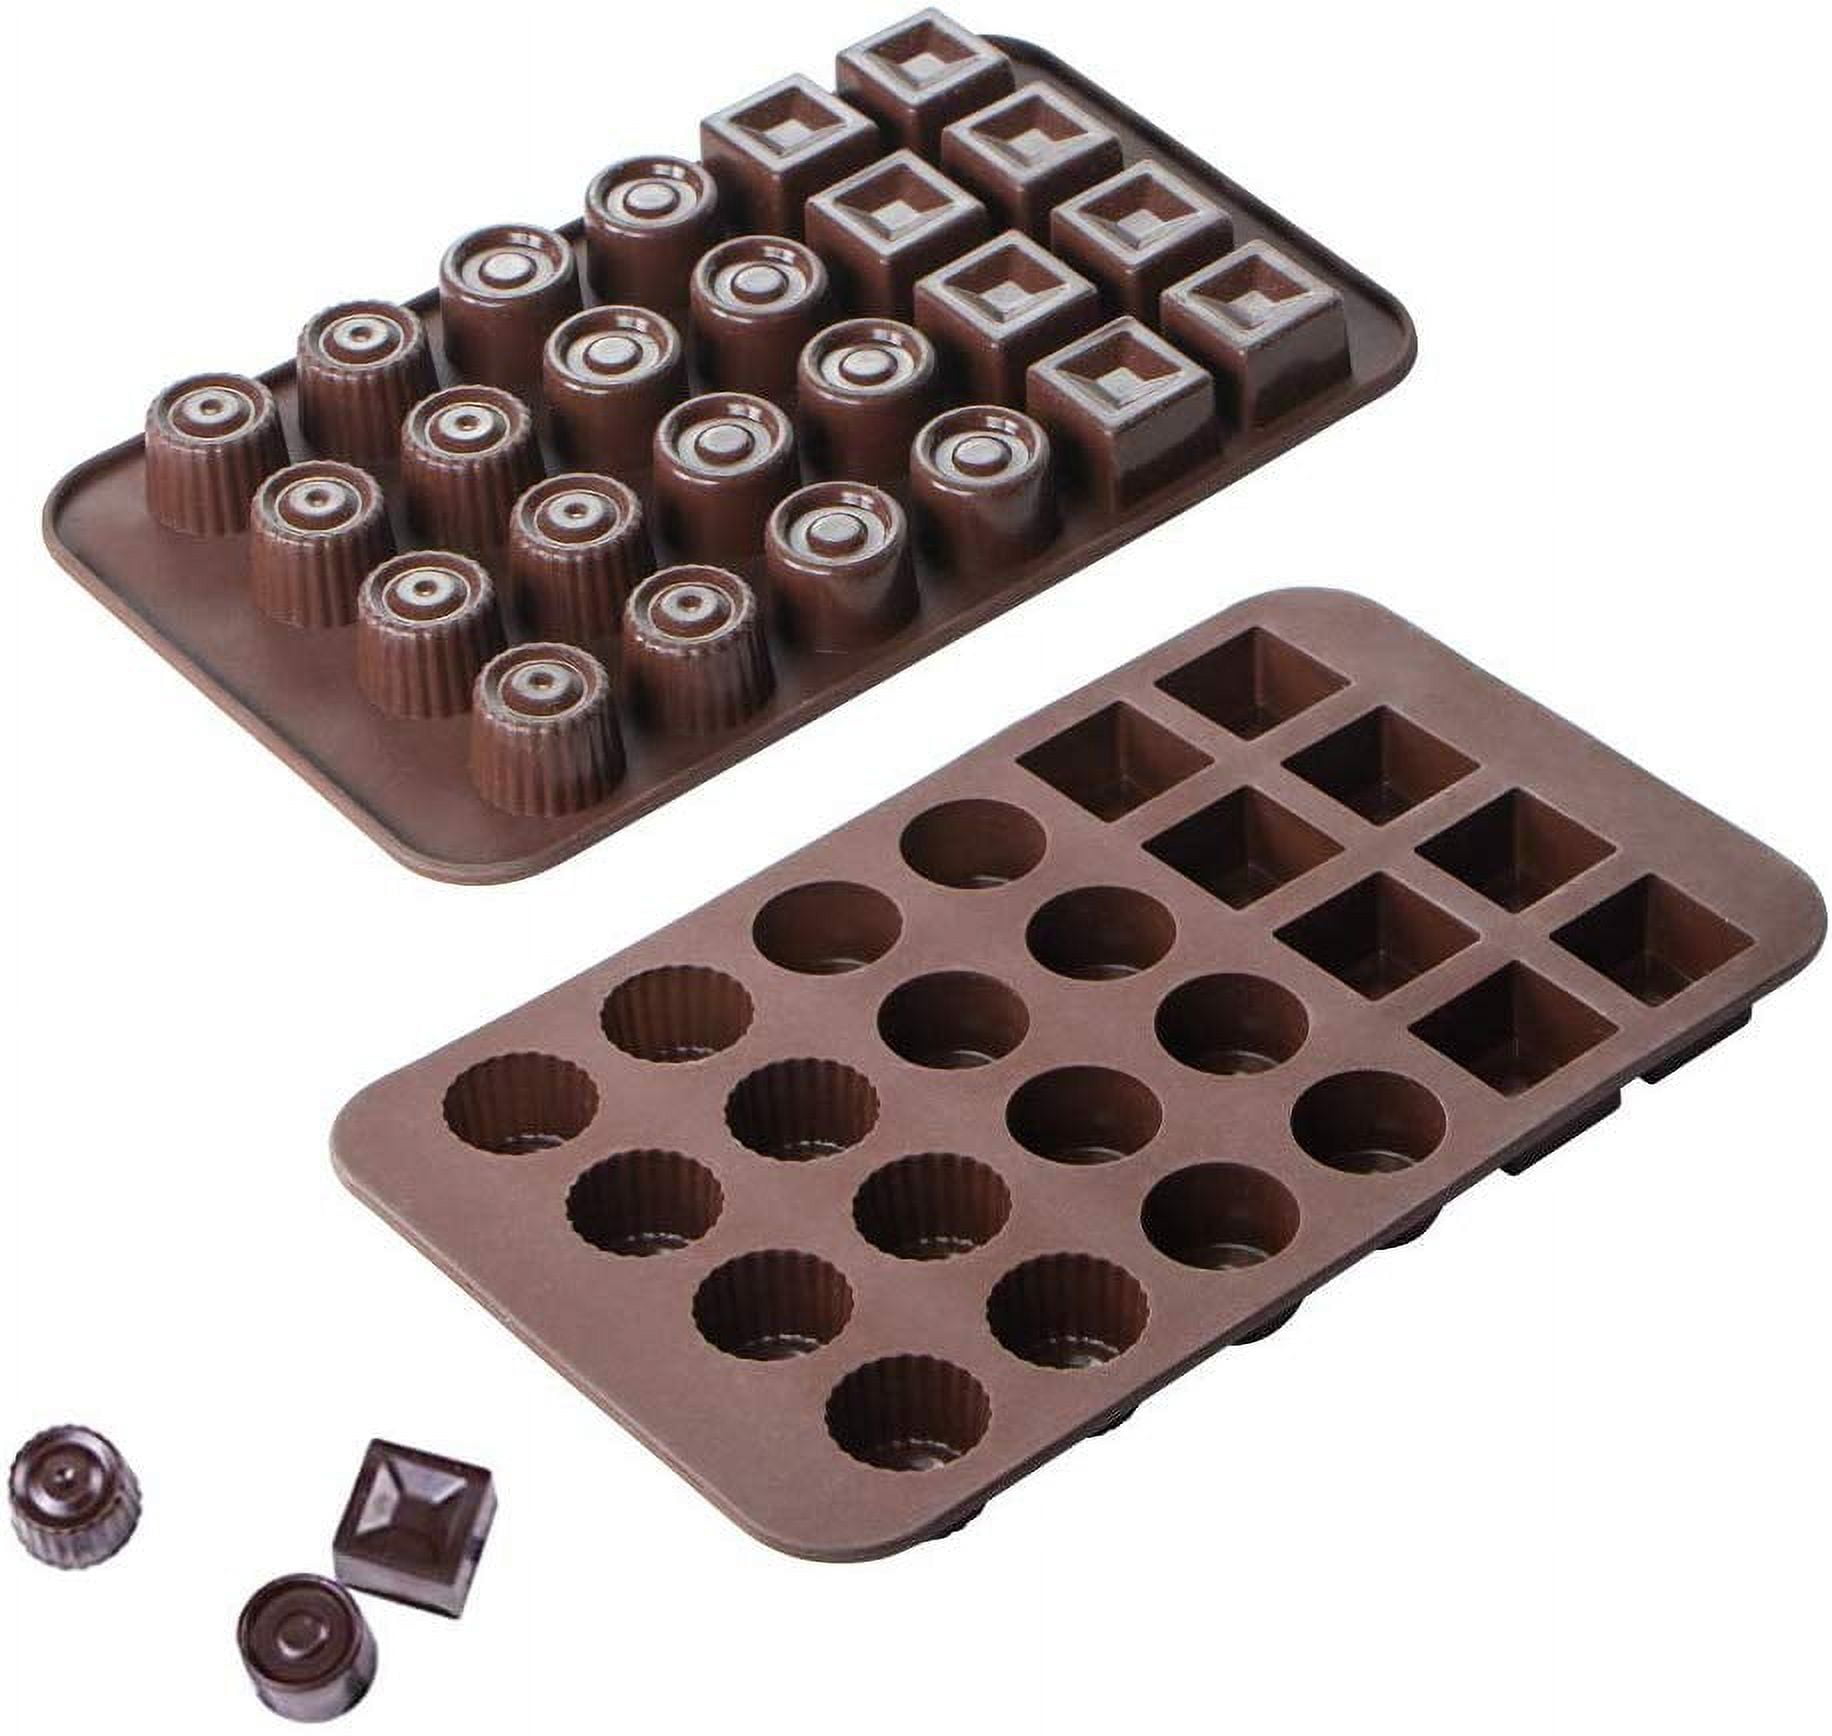 Mity rain 2 Pack 40-Cavity Square Caramel Candy Silicone Molds,Chocolate  Forf Truffles, Fat Bombs Keto Snacks, Whiskey Ice Cube Tray,Grid Fondant